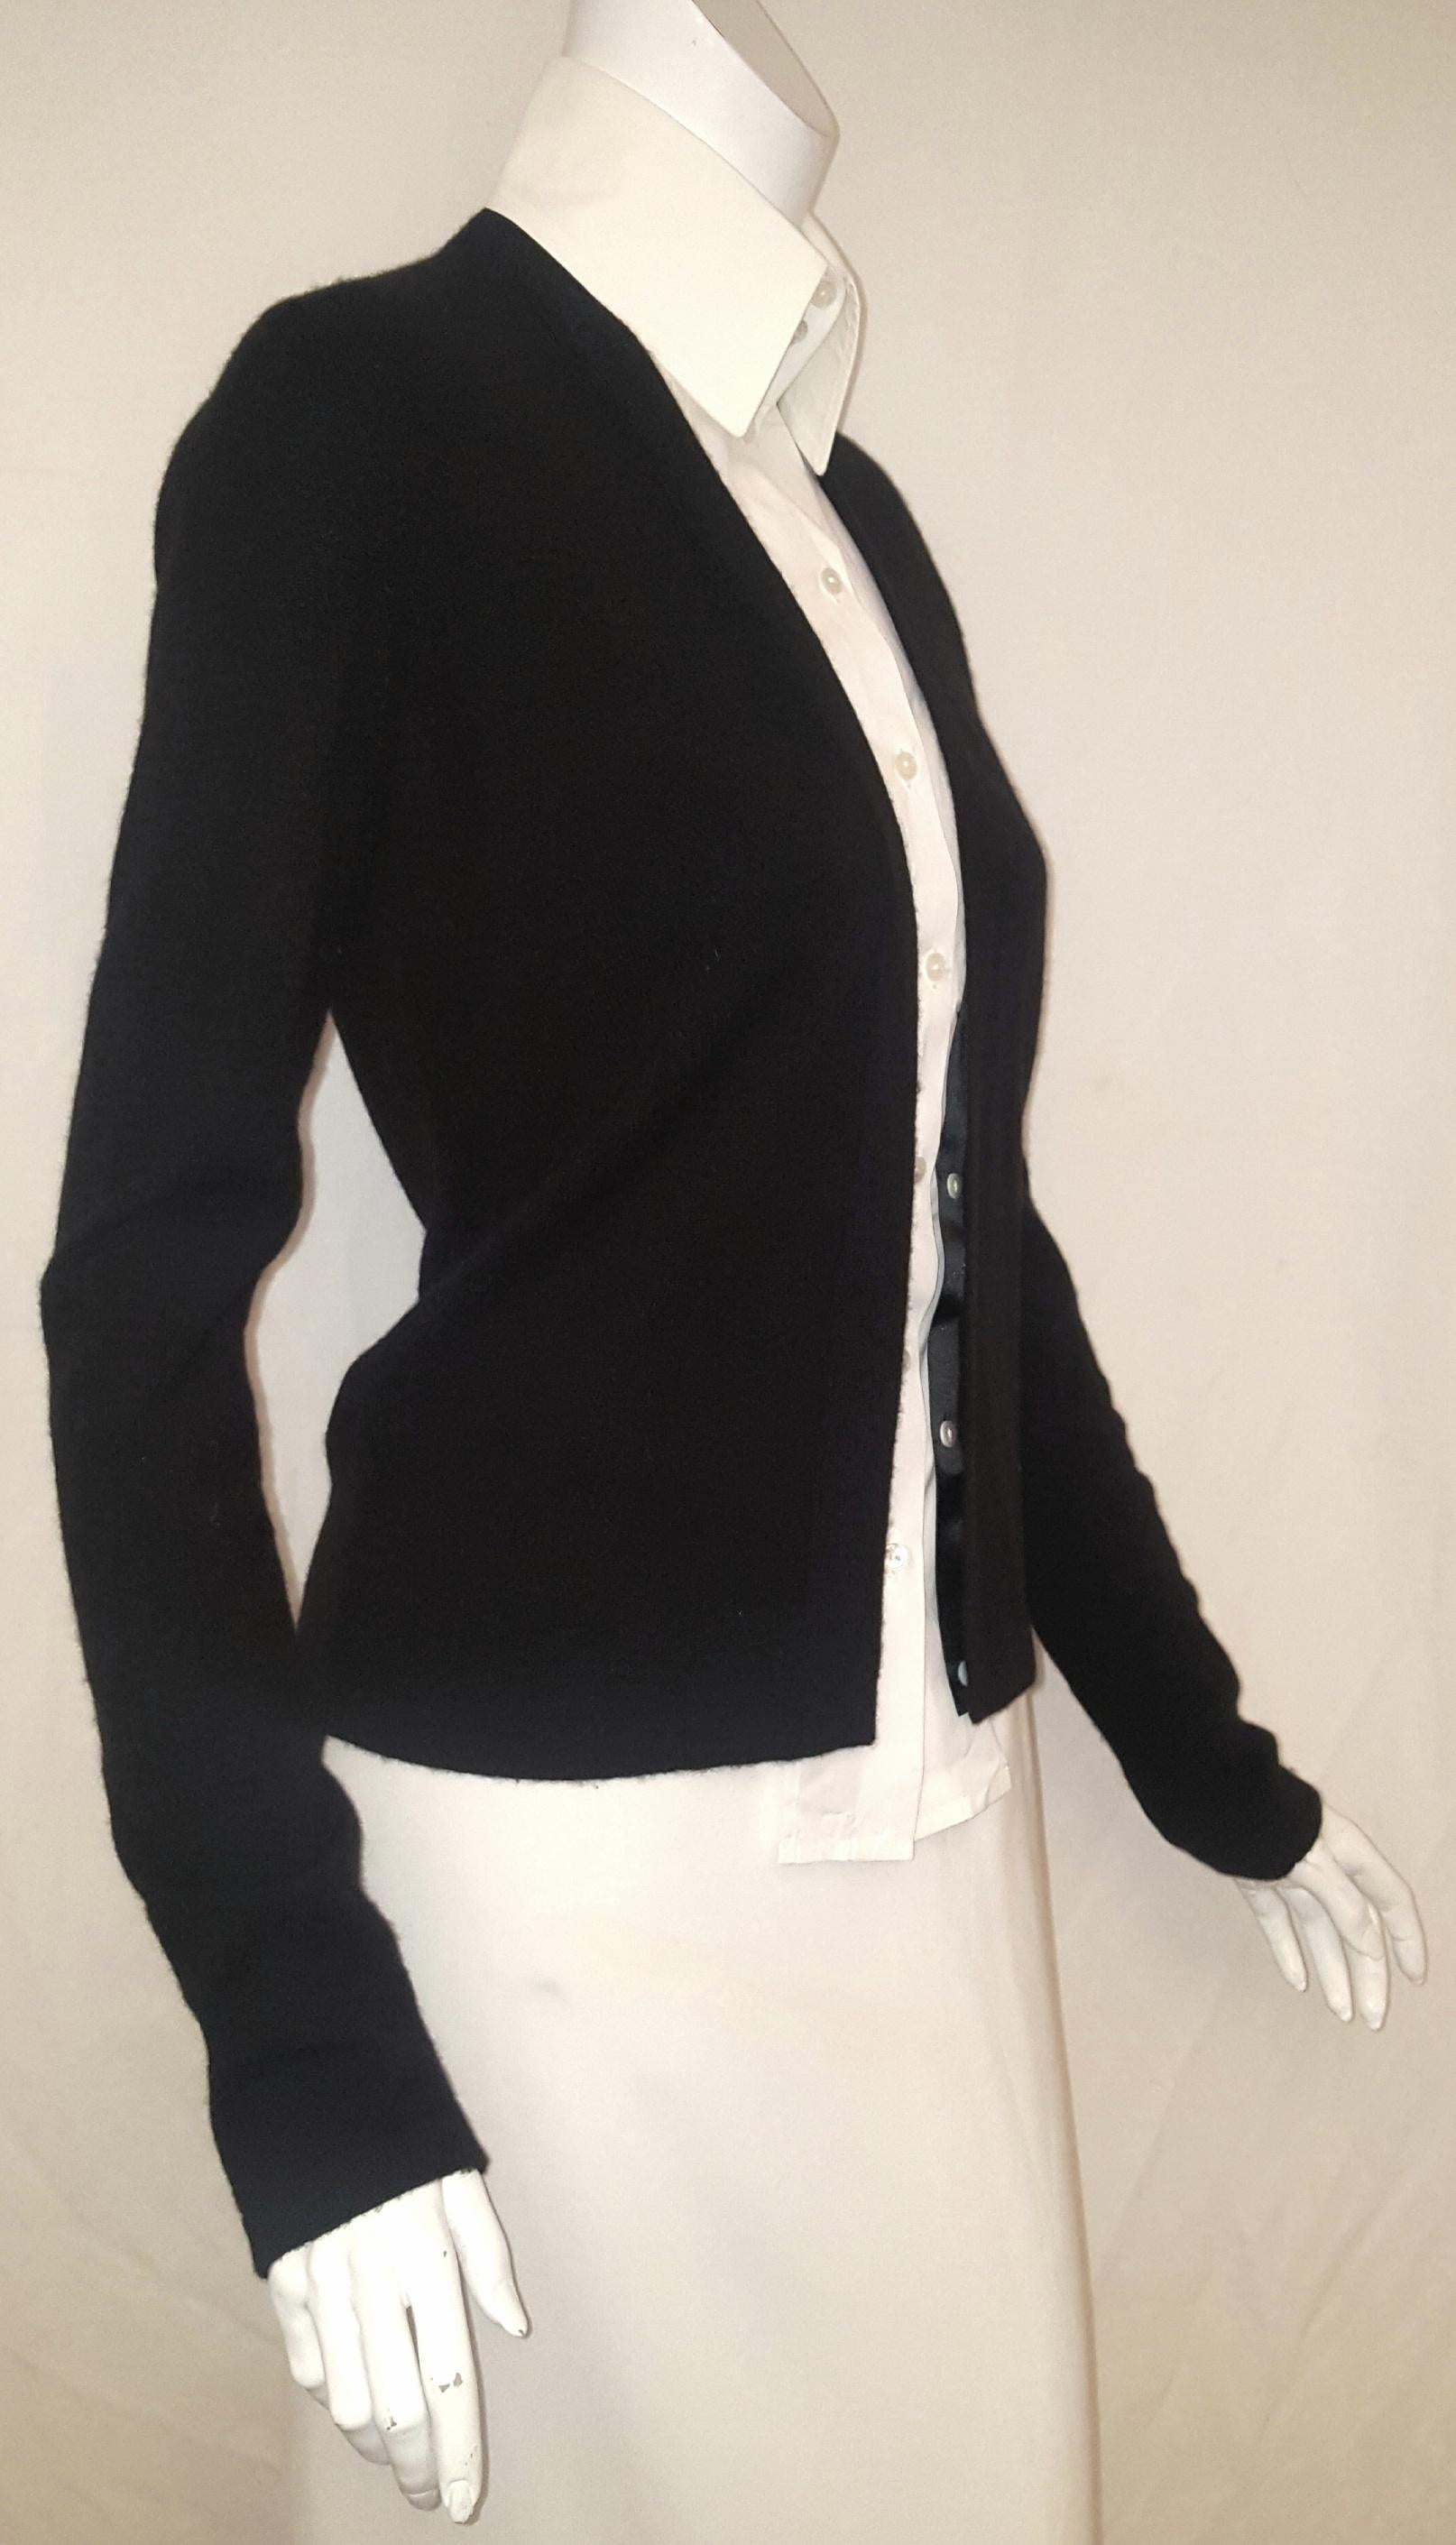 Chanel black cashmere knit cardigan has a faux insert cotton blouse that is detachable since it is only the white collar and front faux shirt that includes Chanel logo buttons.  Black and white was the color for the 2004 fall collection  and was